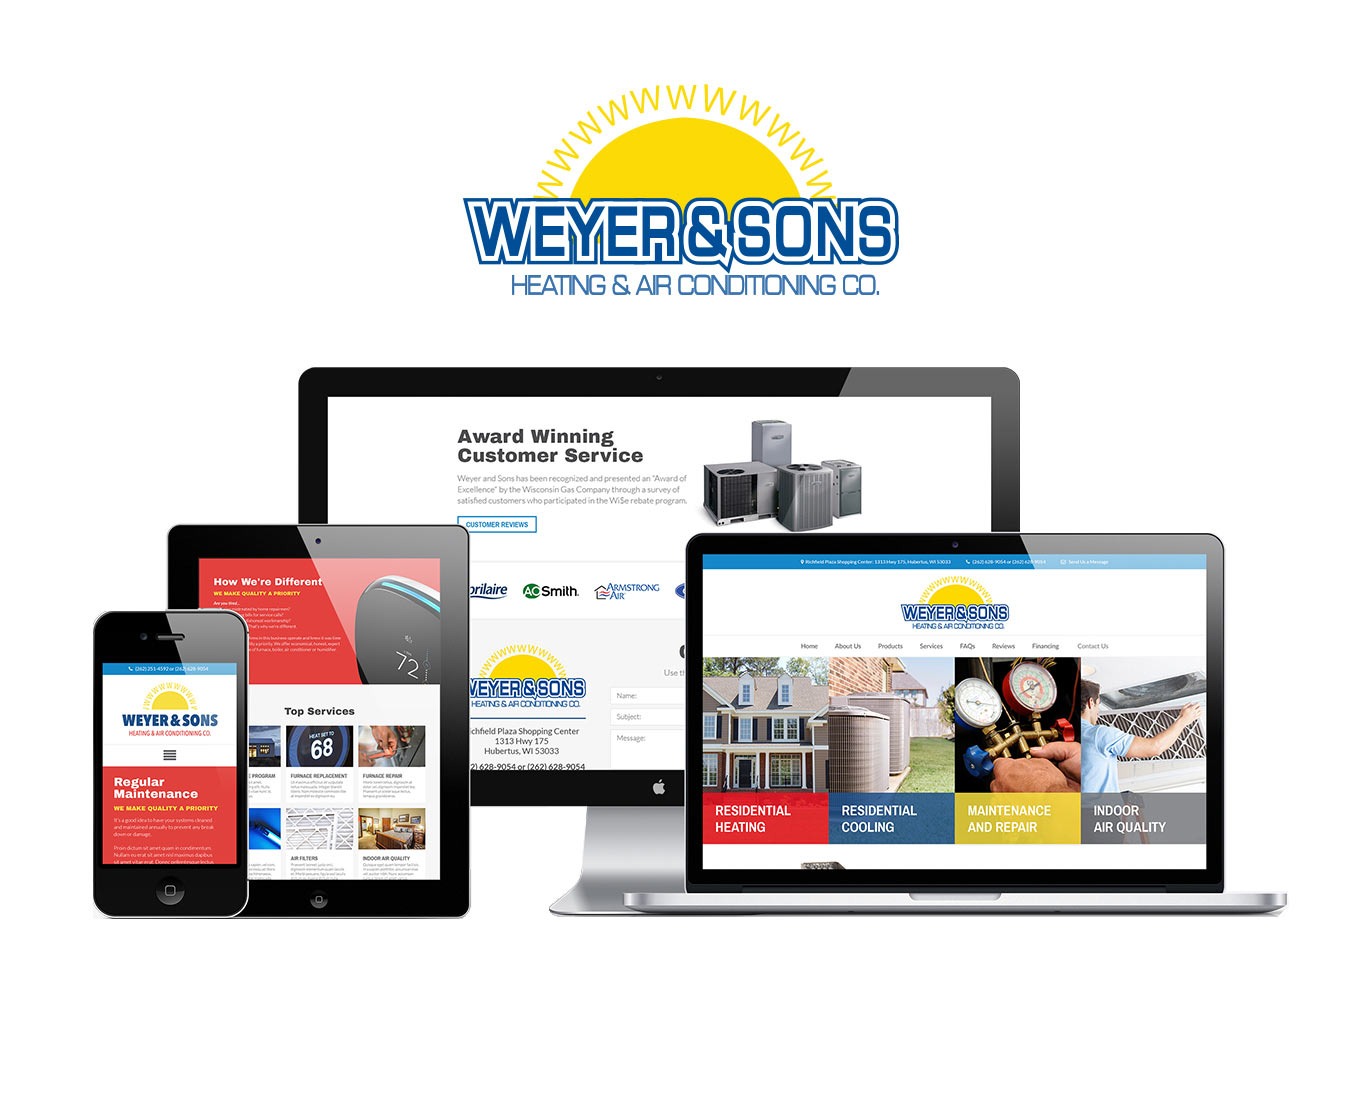 Weyer & Sons Heating & Air Conditioning